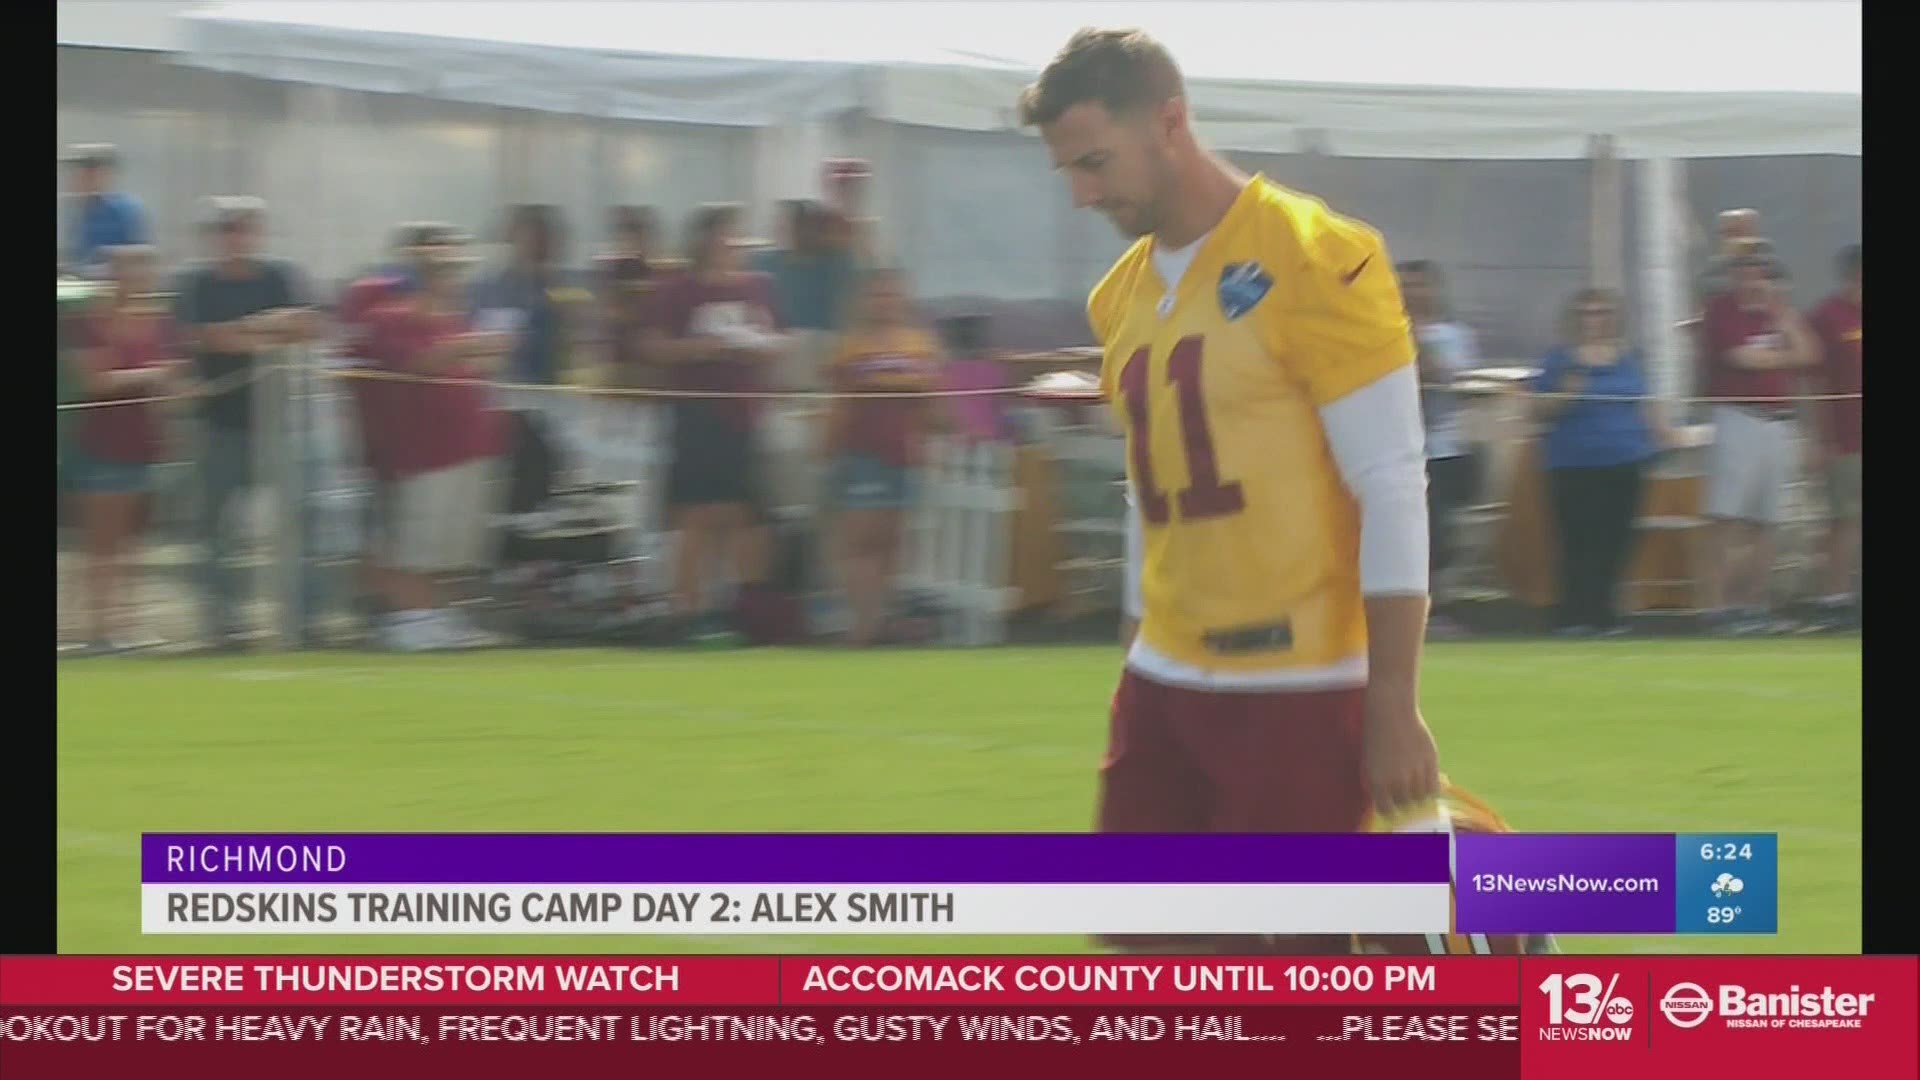 Washington quarterback, Alex Smith is making a smooth transition with the team during training camp. 13 Sports Director, Scott Cash has the story.